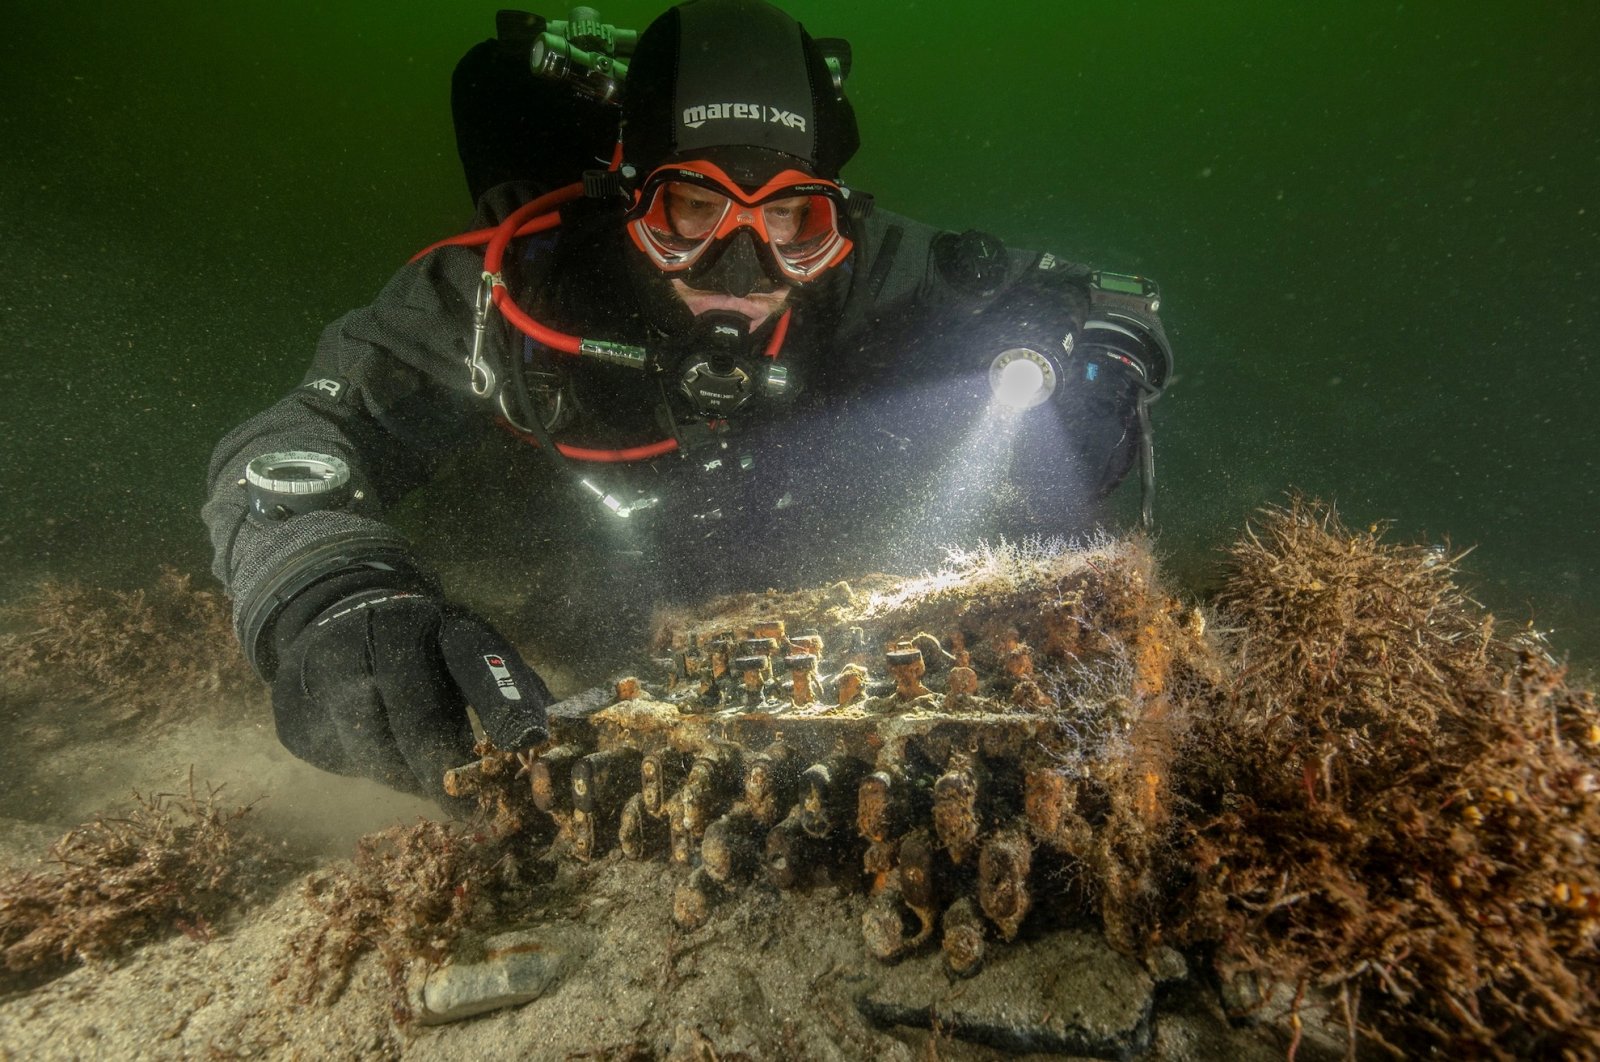 Diver and underwater archaeologist Florian Huber touches a rare Enigma cipher machine used by the Nazi military during World War II, in Gelting Bay near Flensburg, Germany on Nov. 11, 2020. (Reuters Photo)